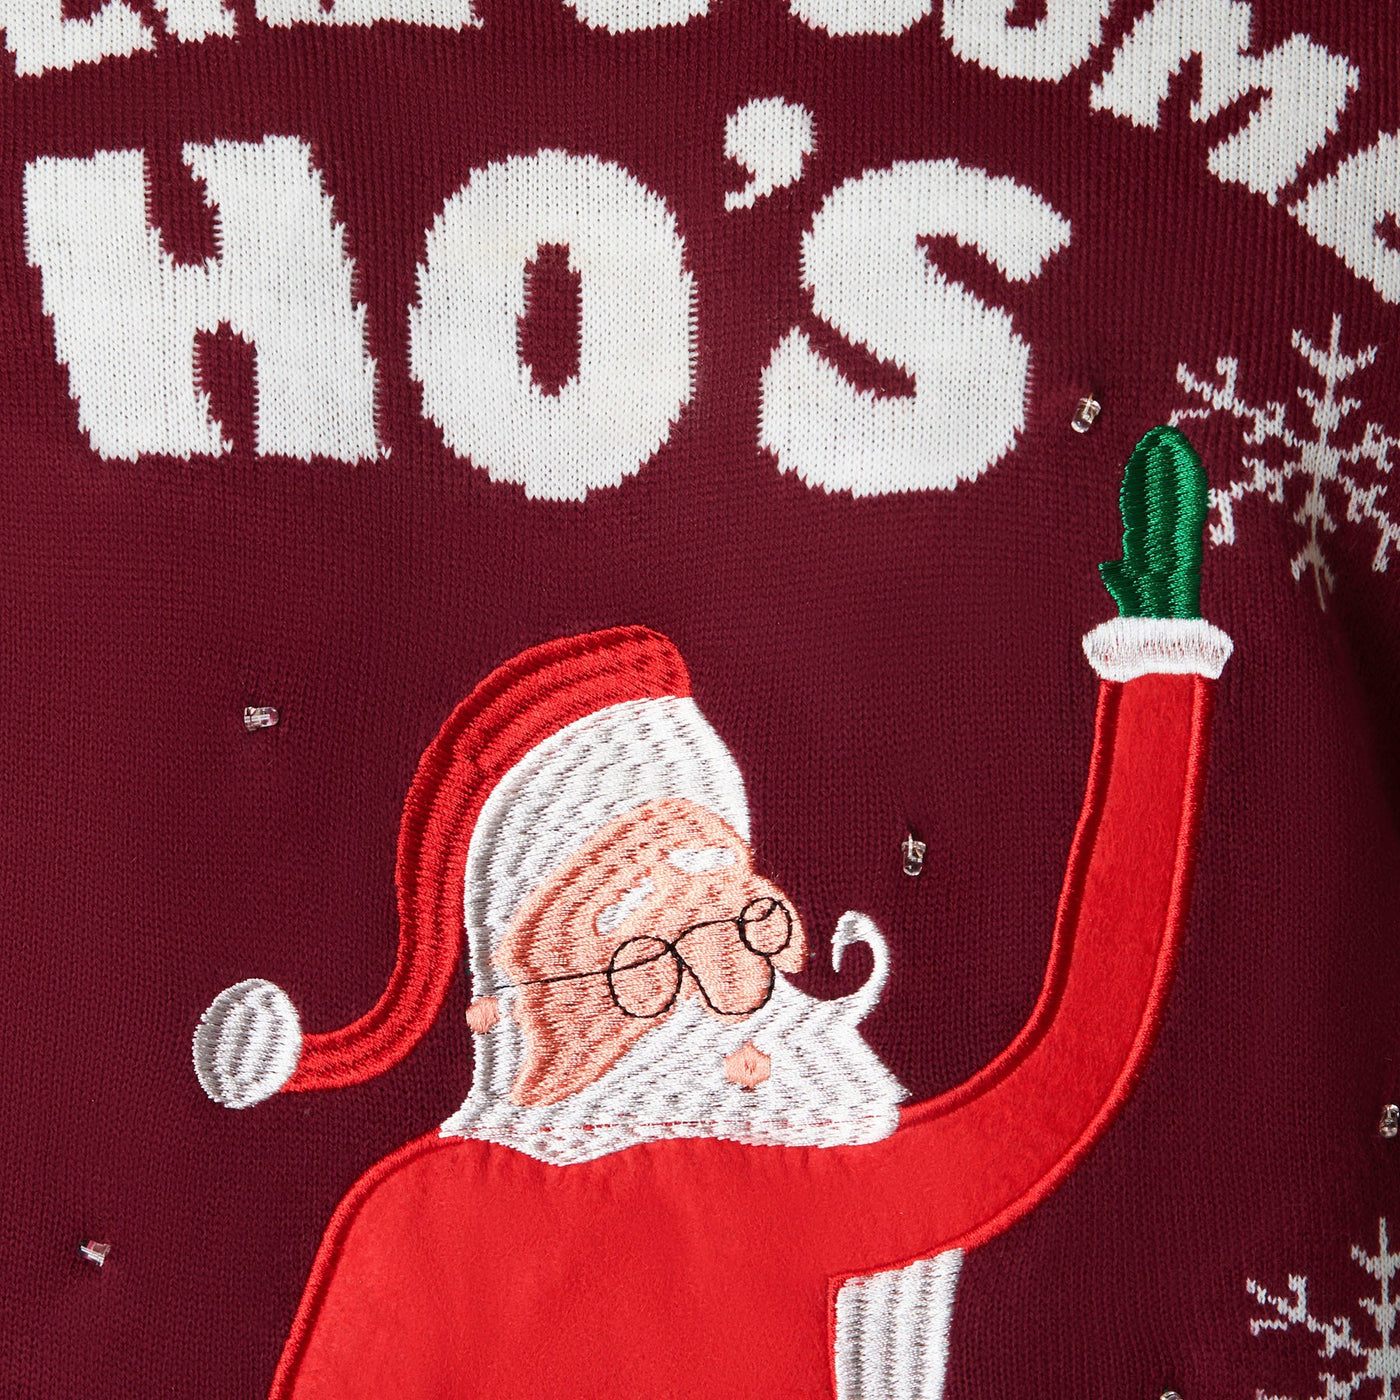 Women's Ho's in This House Christmas Sweater